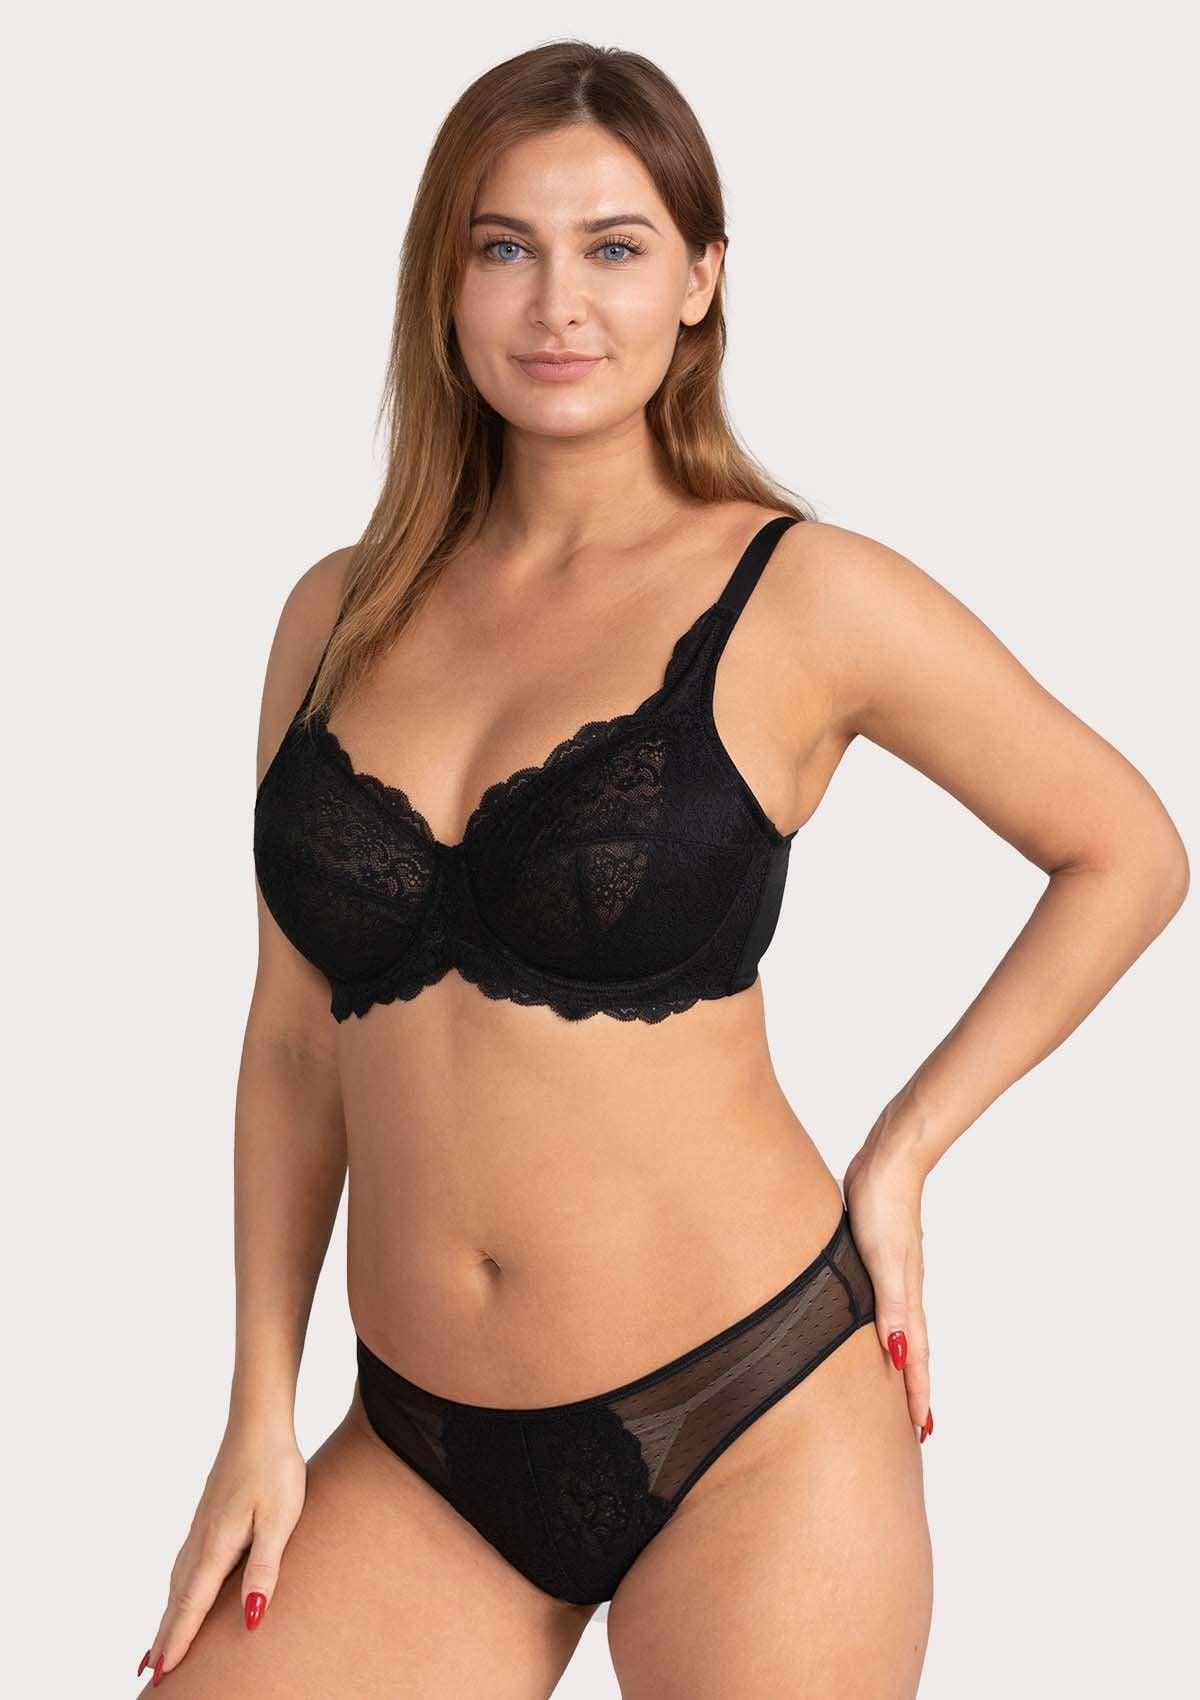 HSIA All-Over Floral Lace Unlined Bra: Minimizer Bra For Heavy Breasts - Black / 40 / DDD/F